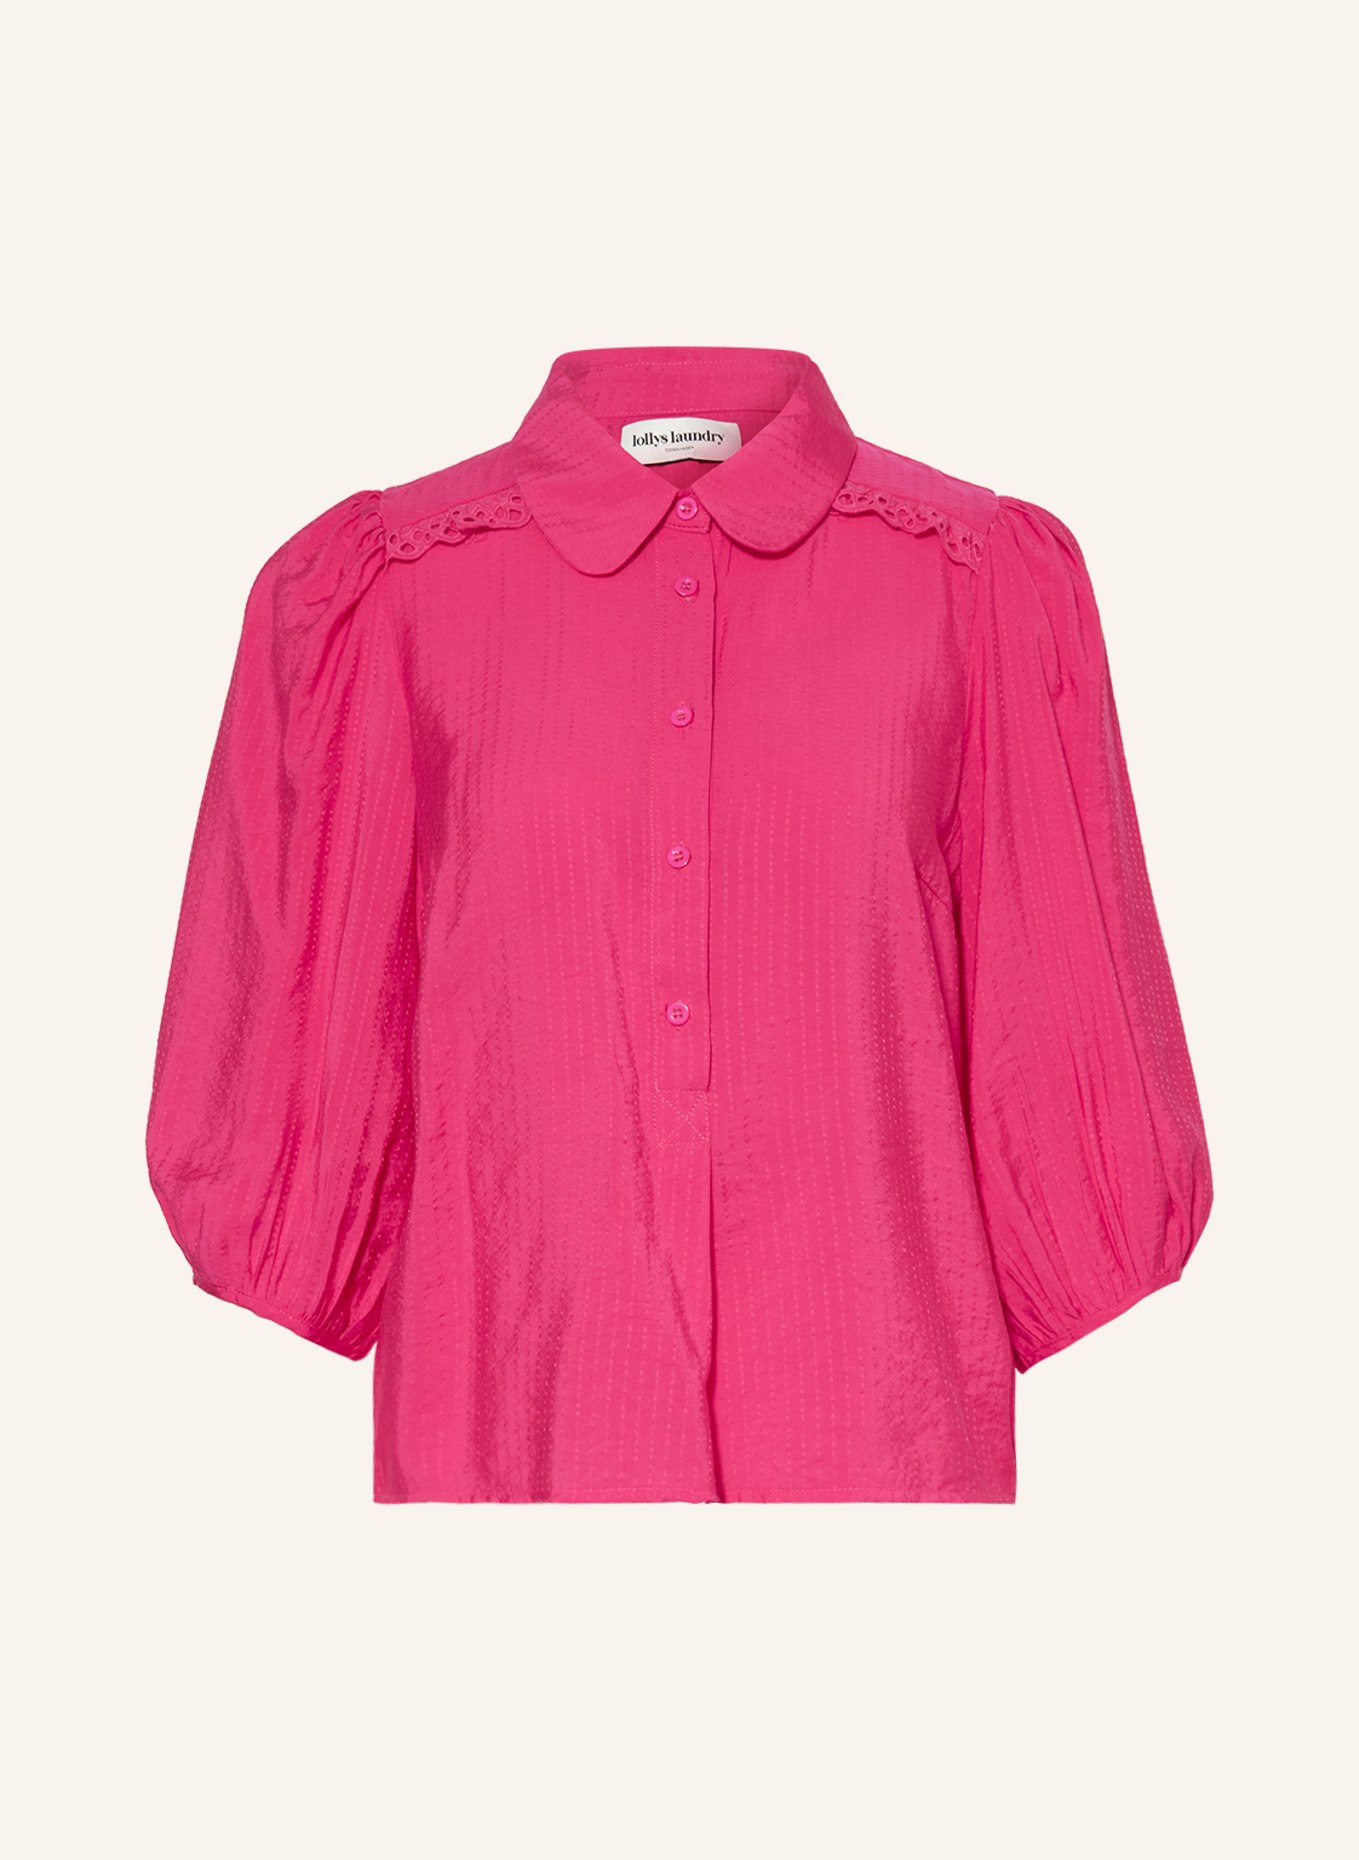 lollys laundry Shirt blouse TUNIS with 3/4 sleeves and broderie anglaise, Color: PINK (Image 1)